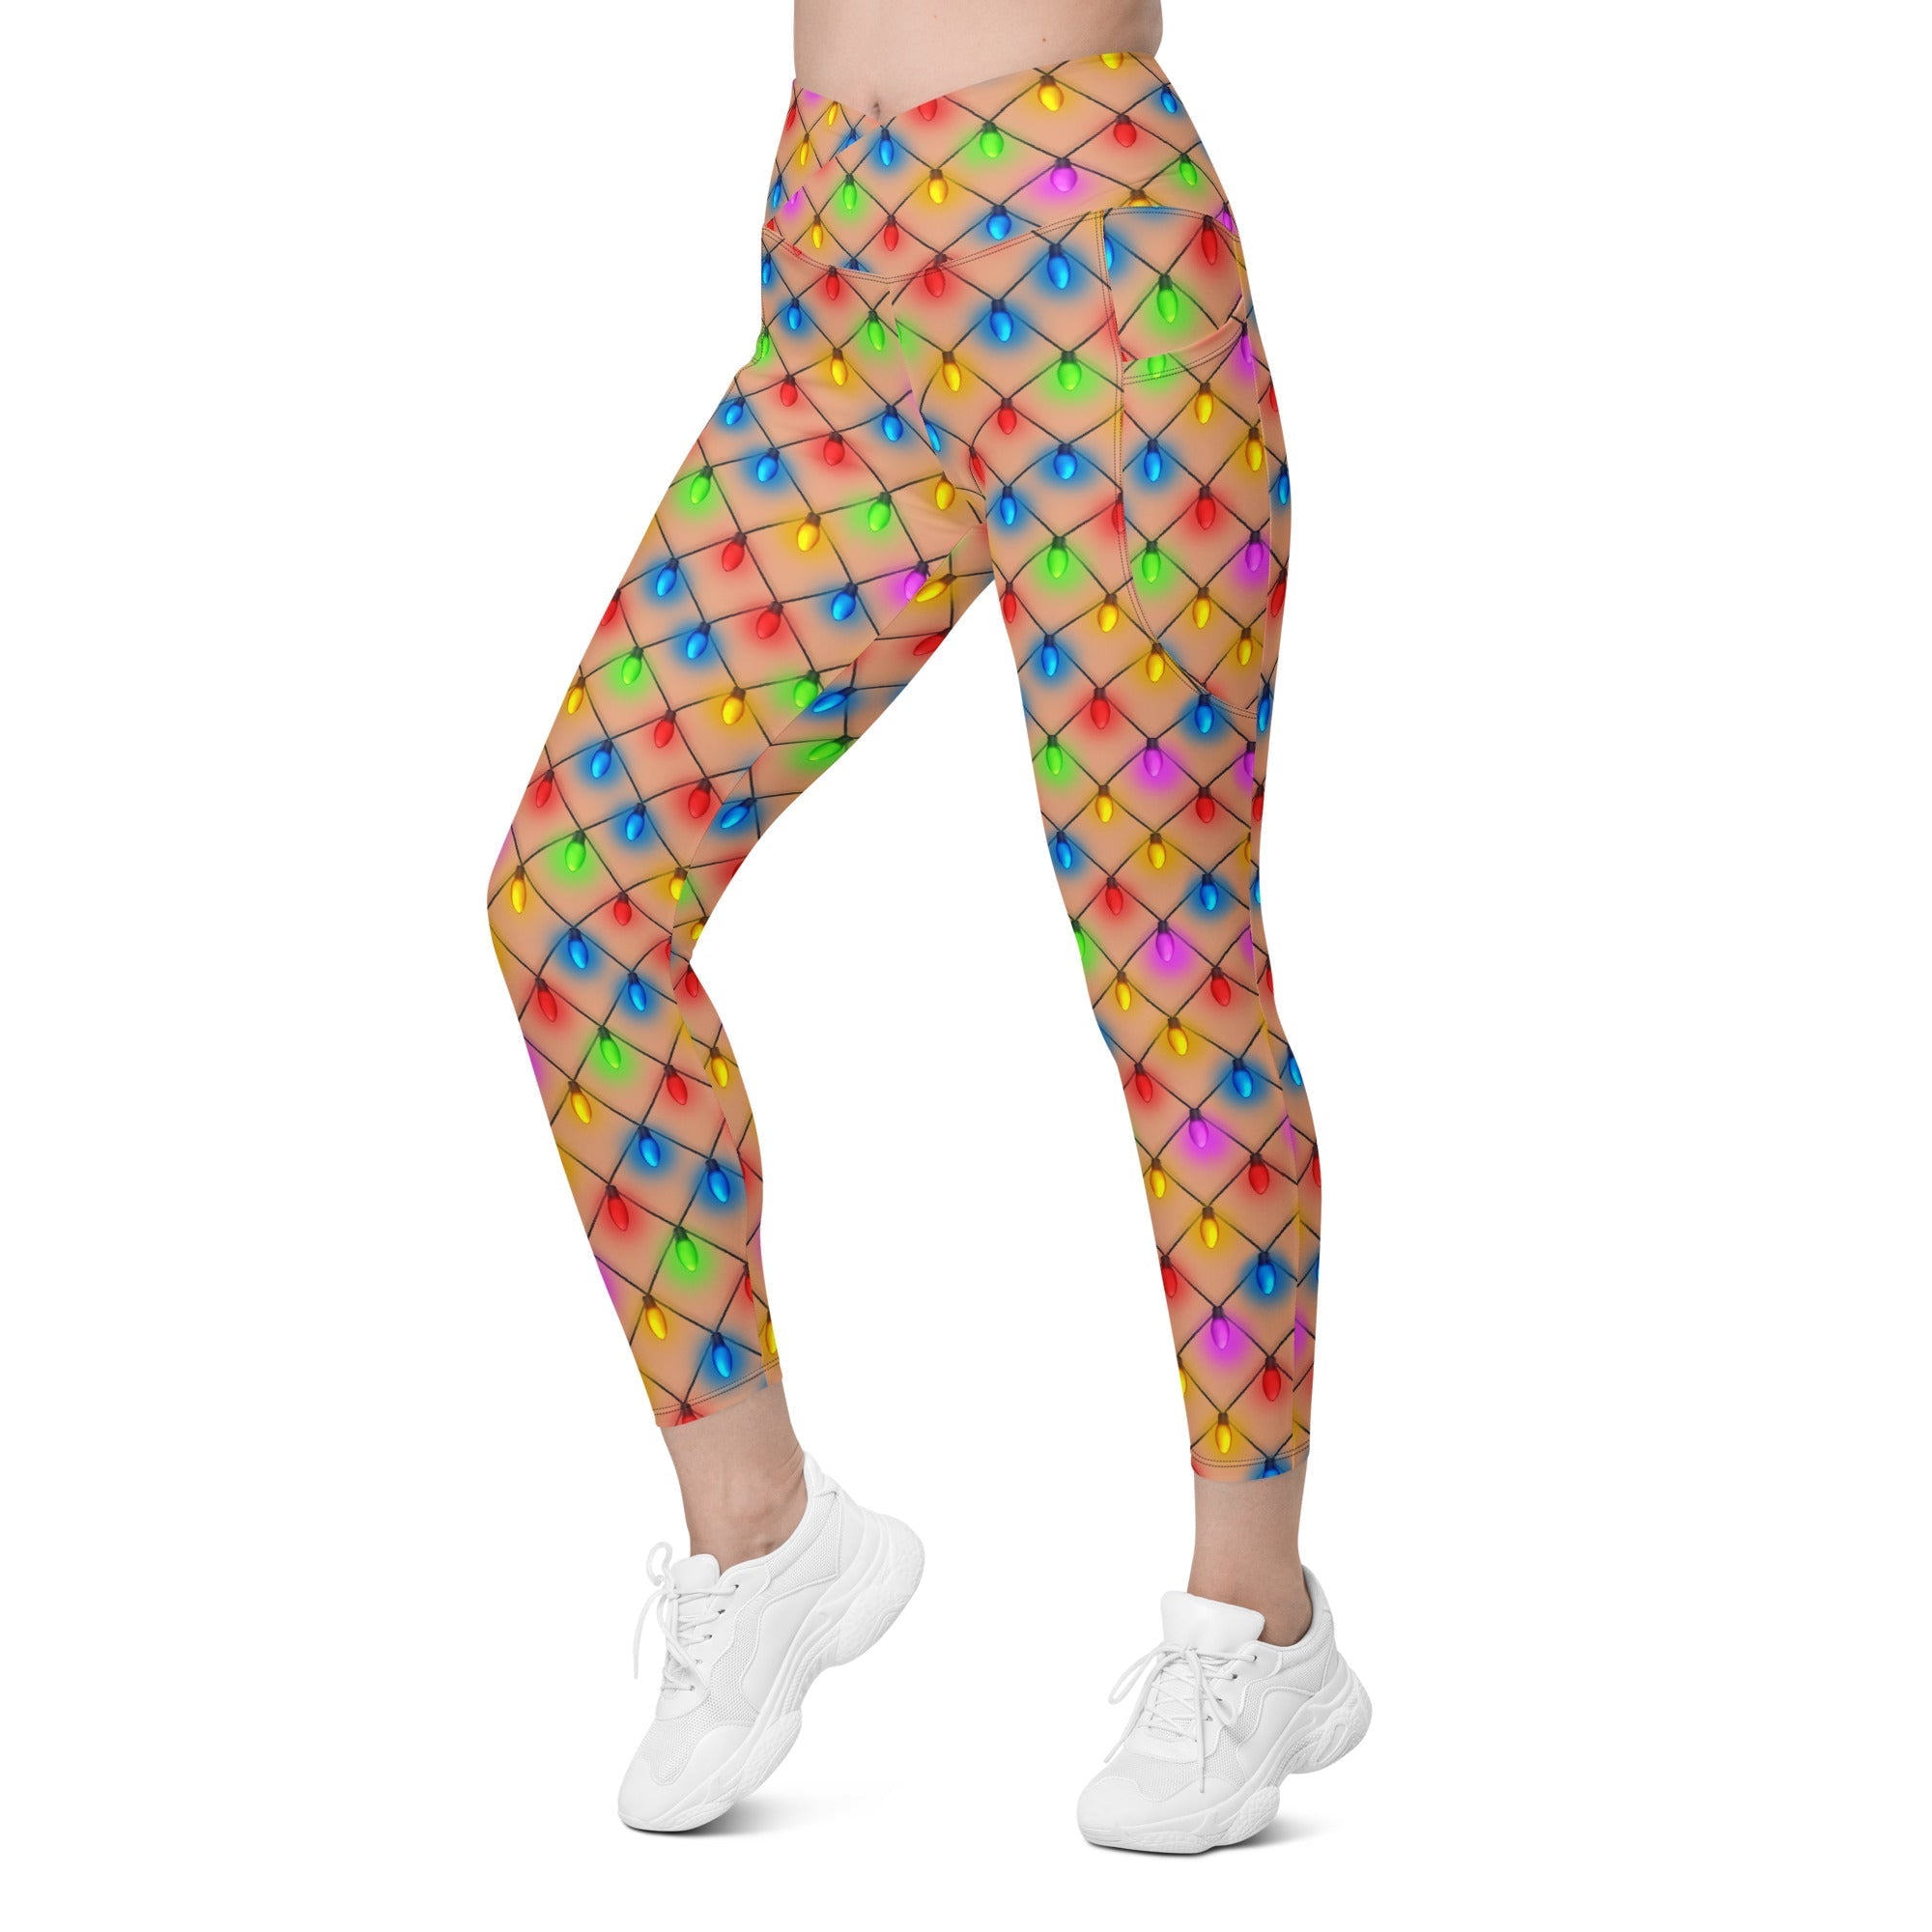 Naughty Christmas Lights Crossover Leggings With Pockets